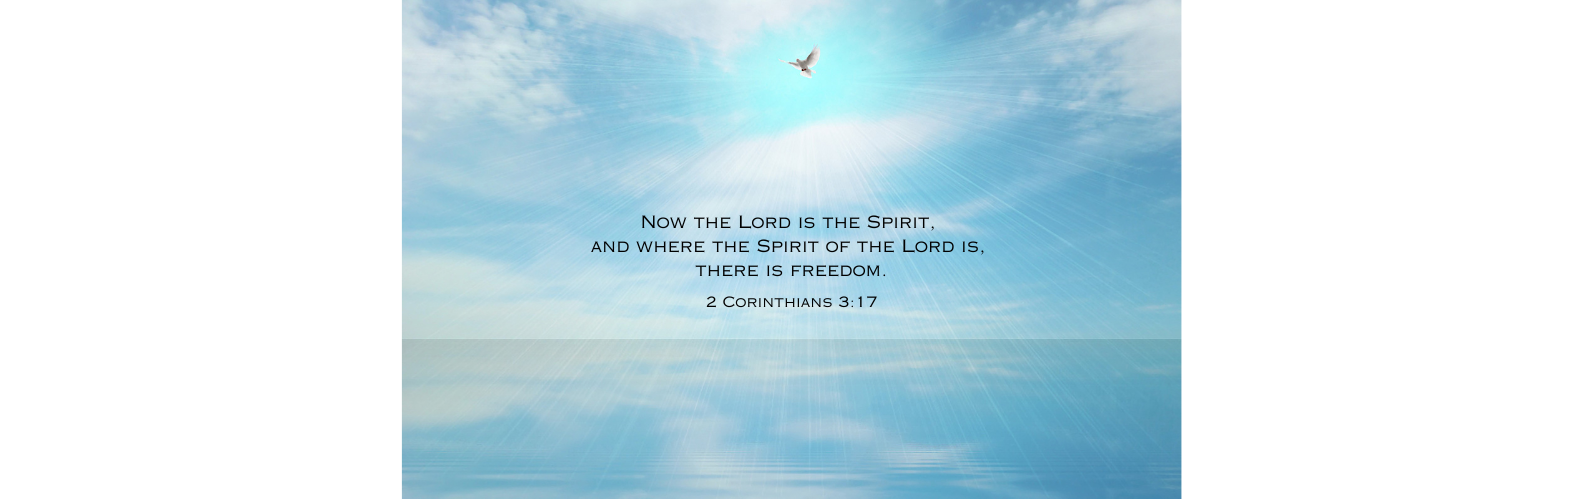 To Know The Holy Spirit, He Cannot Be Grieved